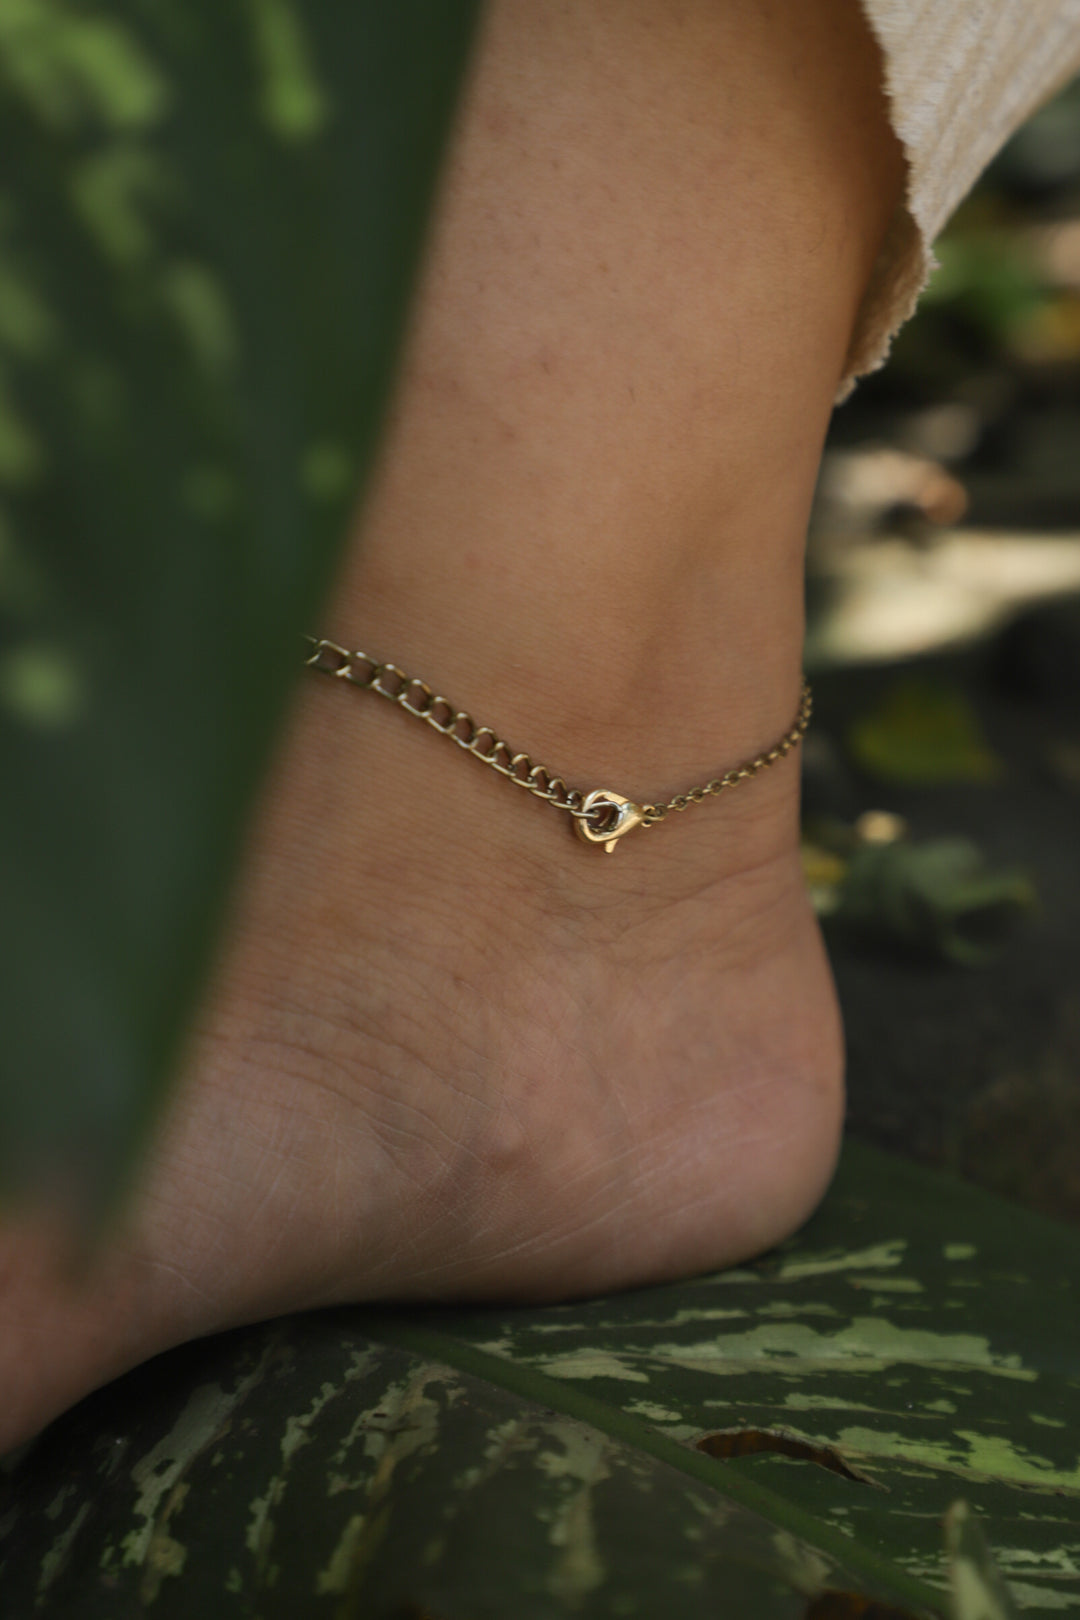 Seed of life anklet with lapis ~white